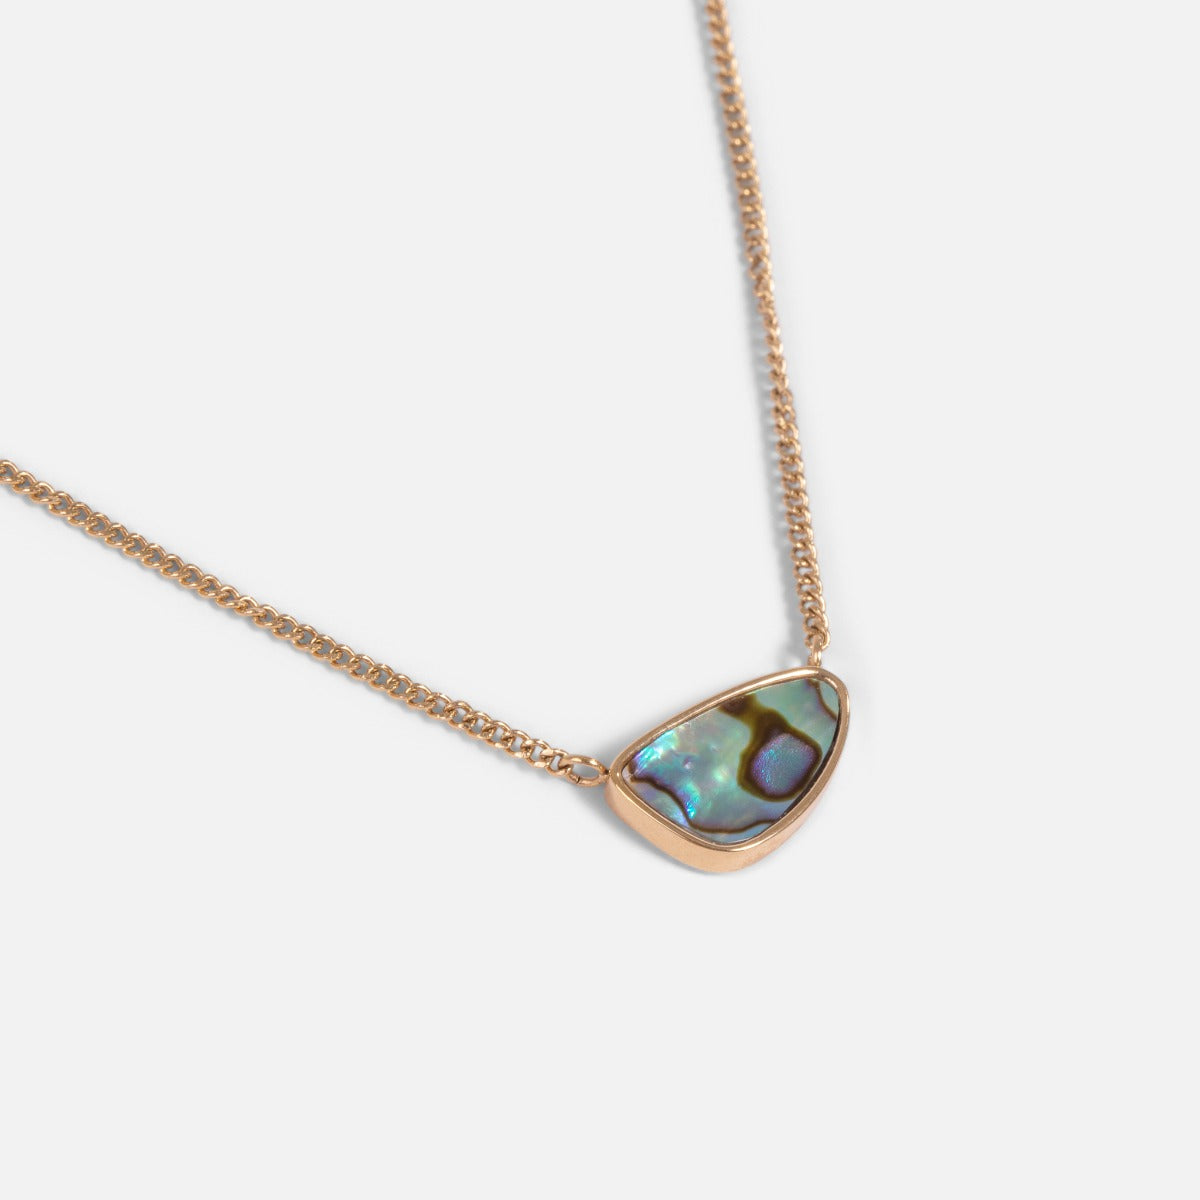 20 inches golden stainless steel necklace with abalone stone 